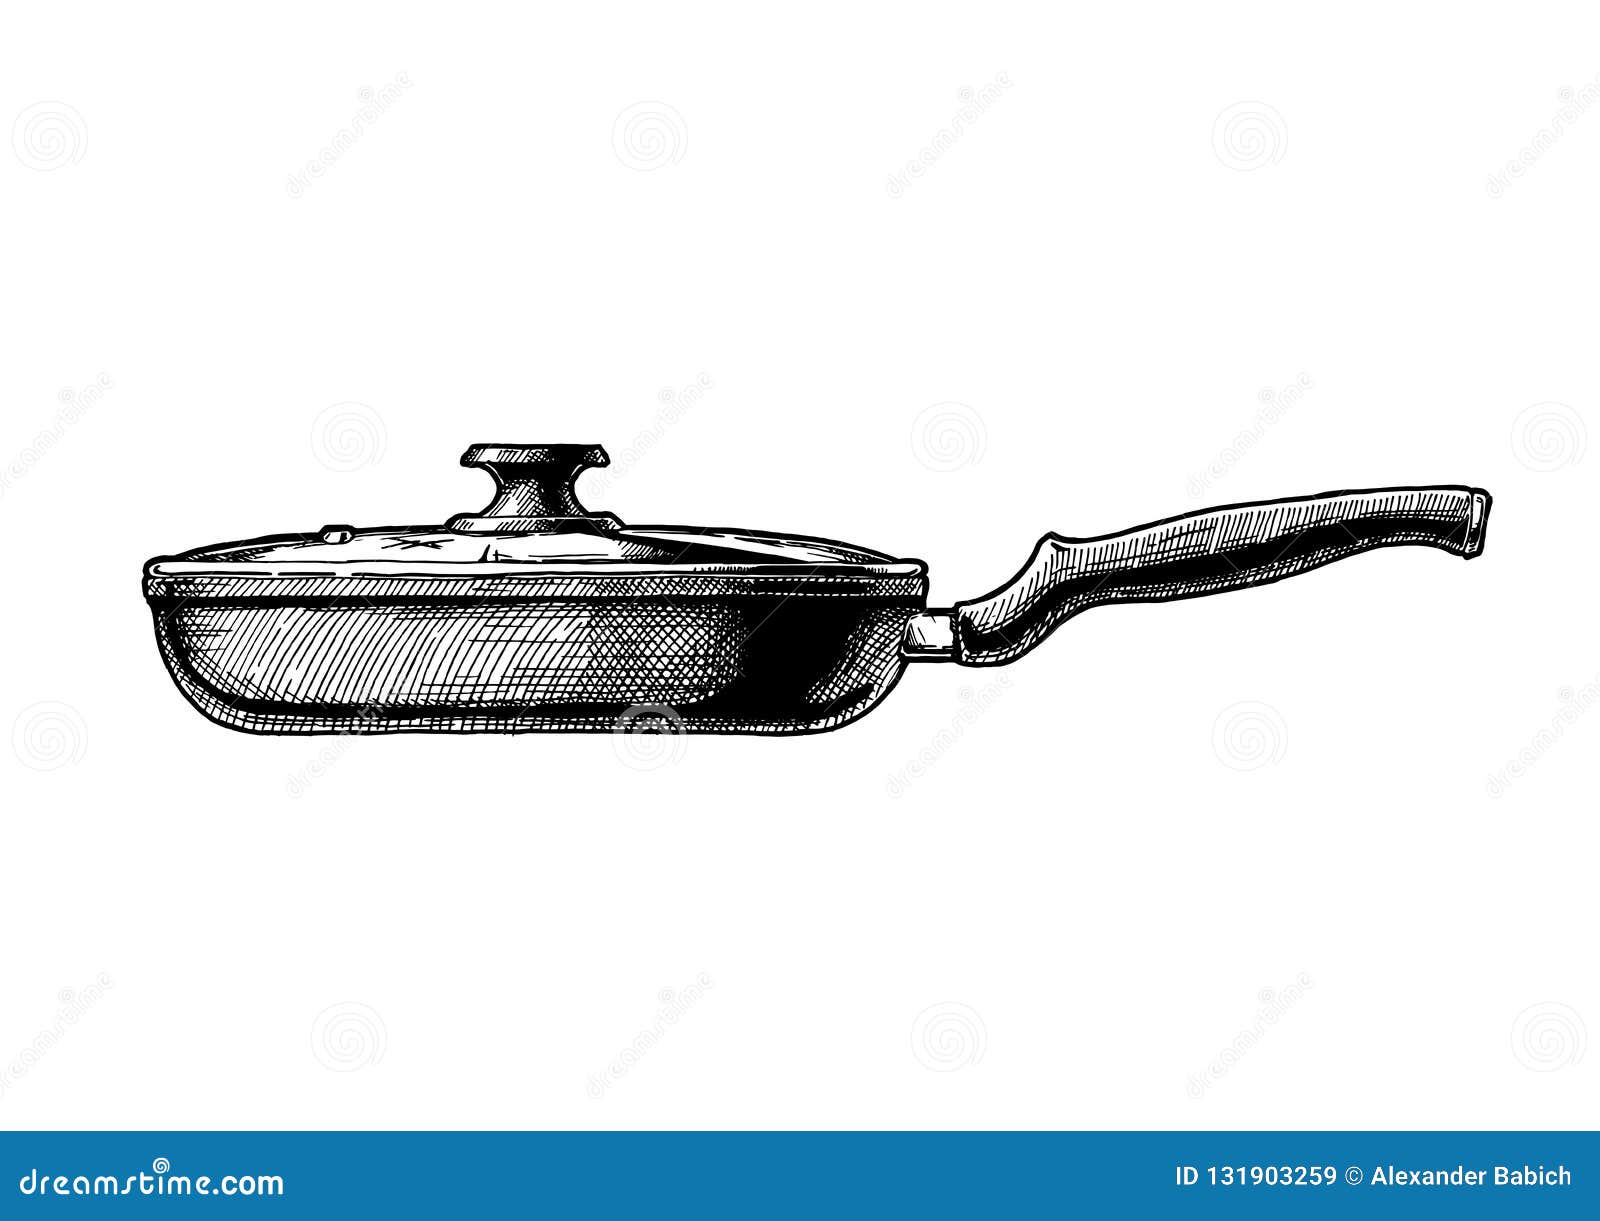 https://thumbs.dreamstime.com/z/vector-hand-drawn-illustration-frying-pan-vintage-engraved-style-isolated-white-background-side-view-illustration-131903259.jpg